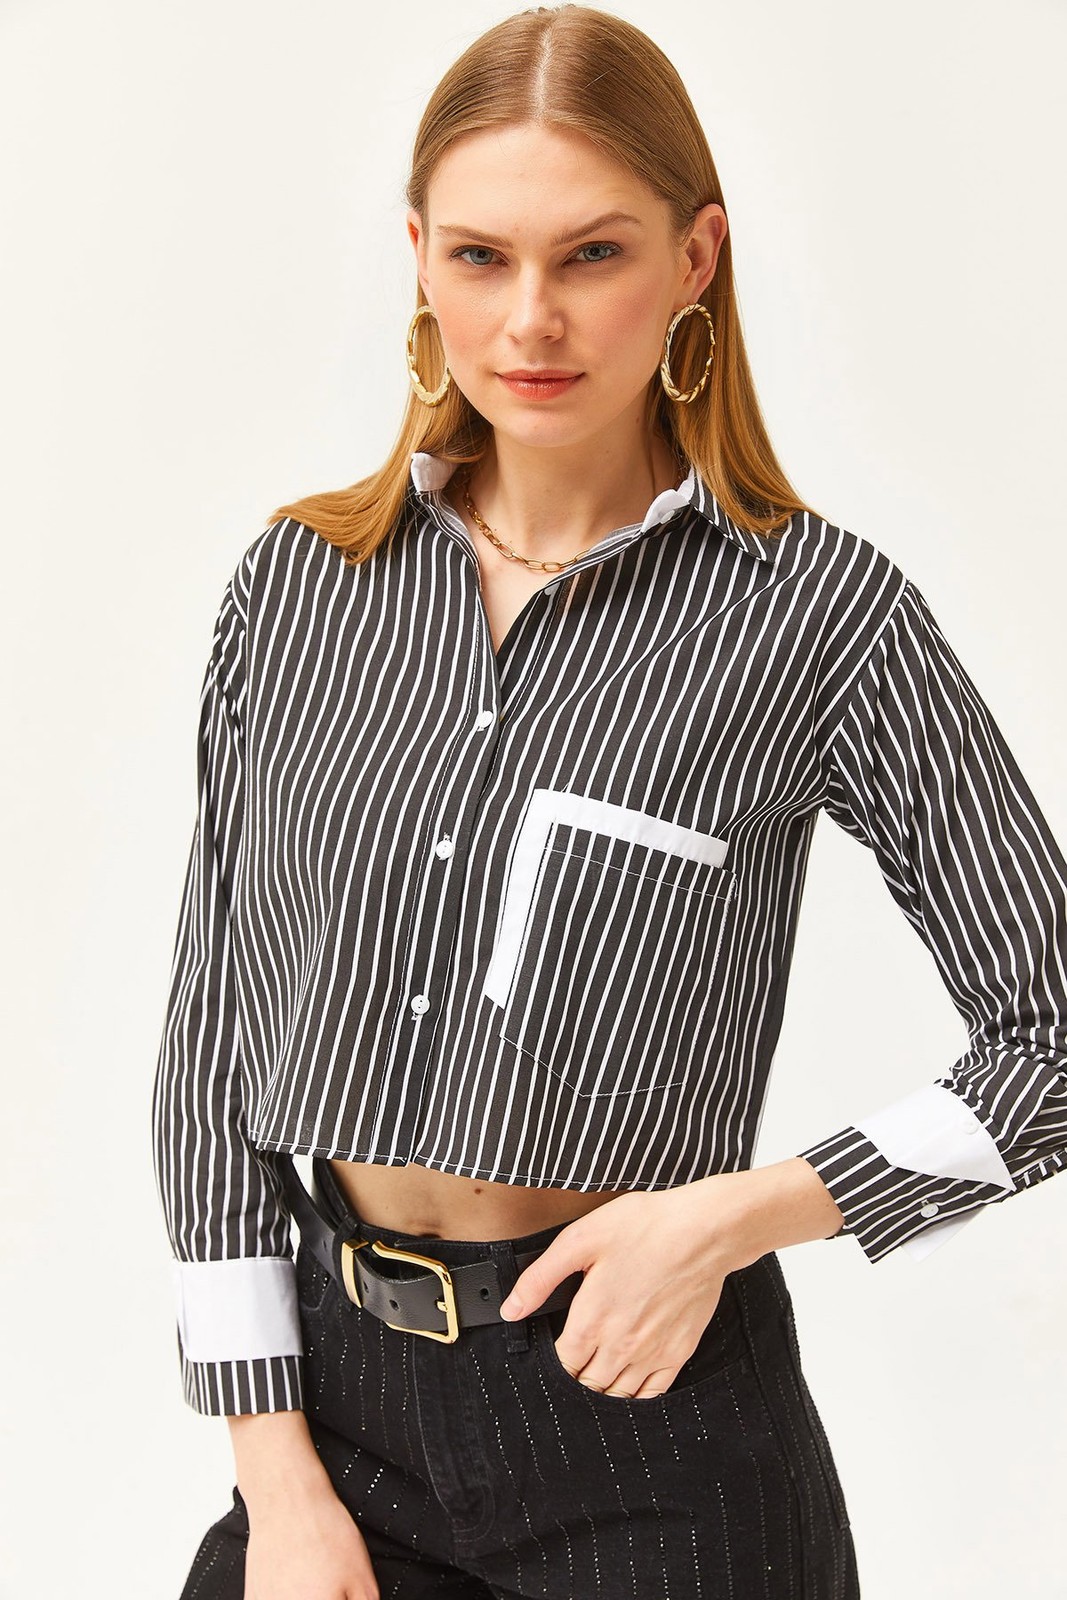 Olalook Women's Black and White Pocket and Cuff Detail Striped Crop Shirt